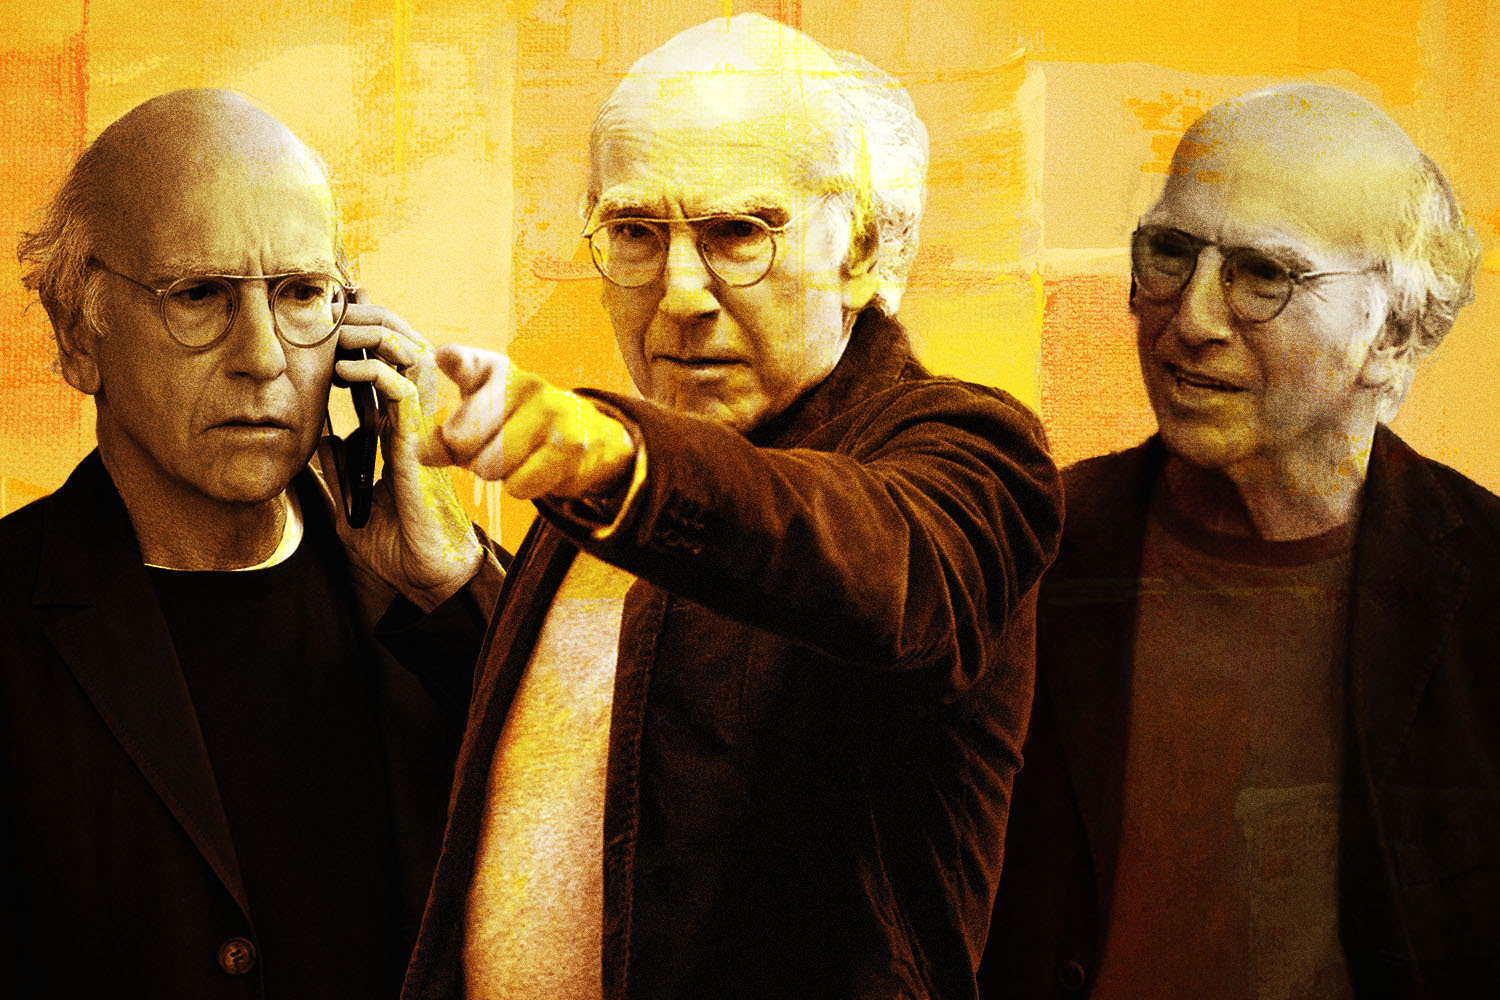 curb your enthusiasm season 7 episode 4 watch series